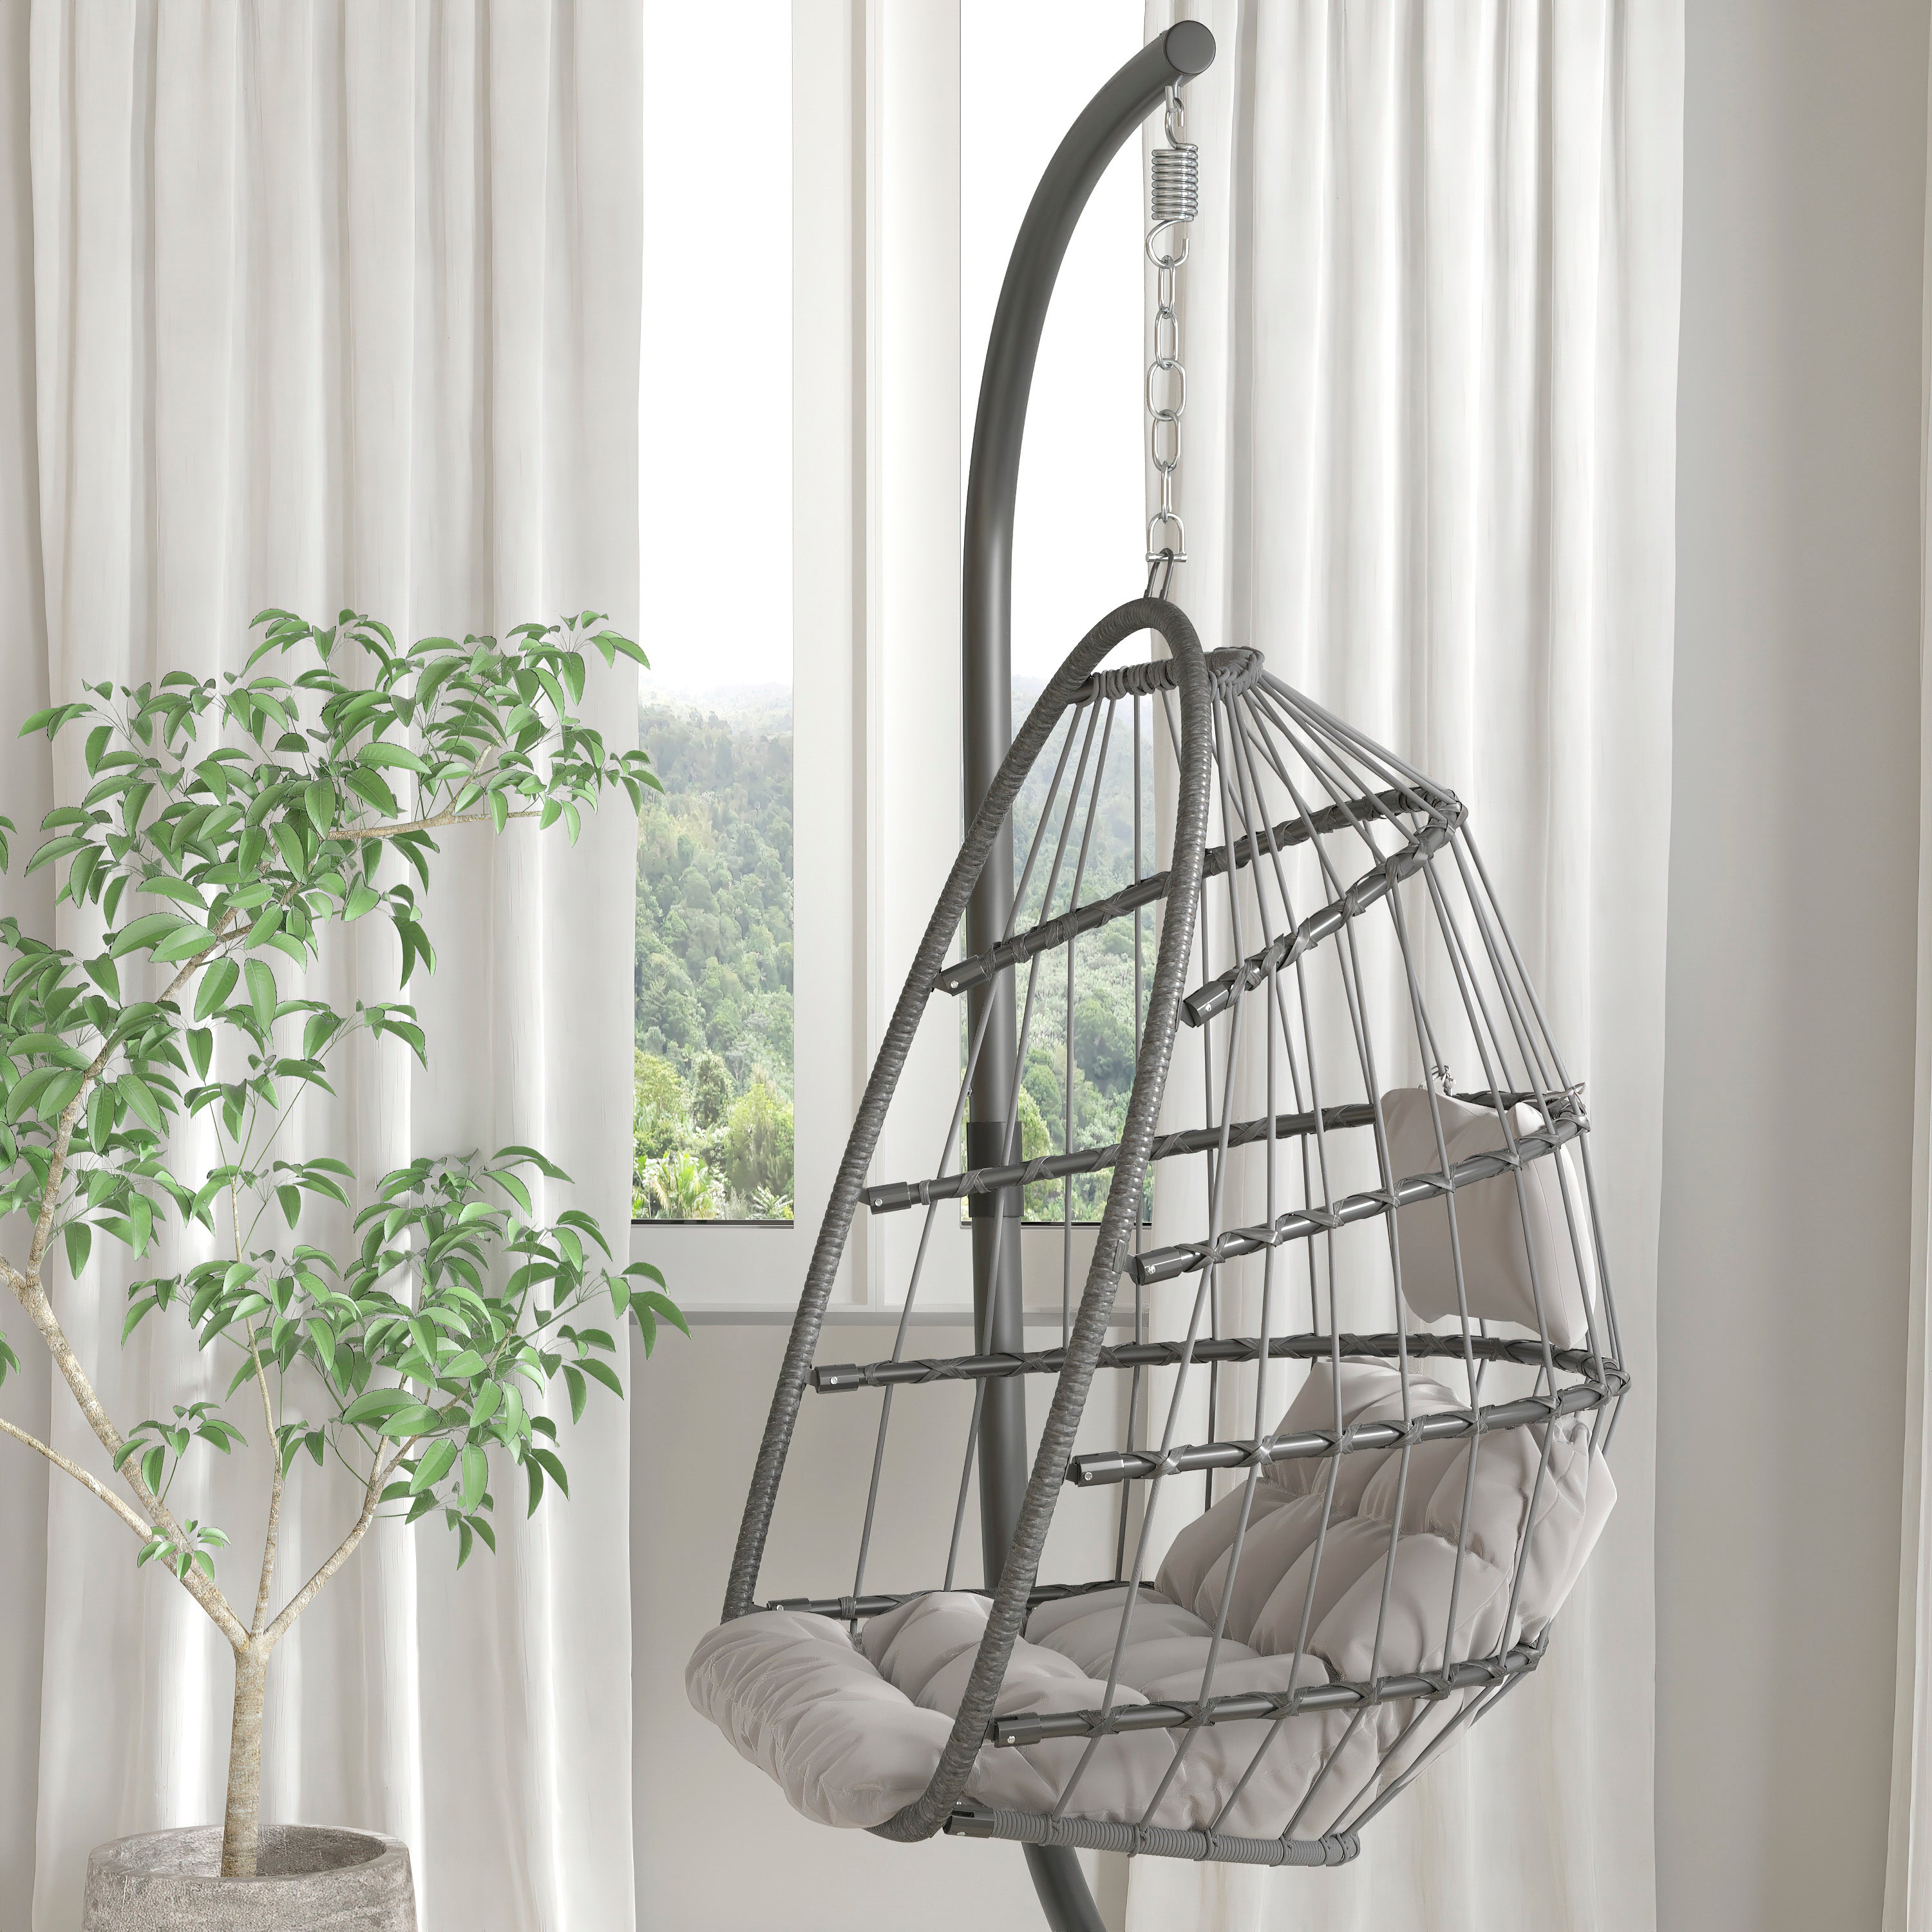 Cleo Patio Hanging Egg Chair, Wicker Hammock with Soft Seat Cushions & Swing Stand, Indoor/Outdoor Cushions-Hammock Chair-Flash Furniture-Wall2Wall Furnishings